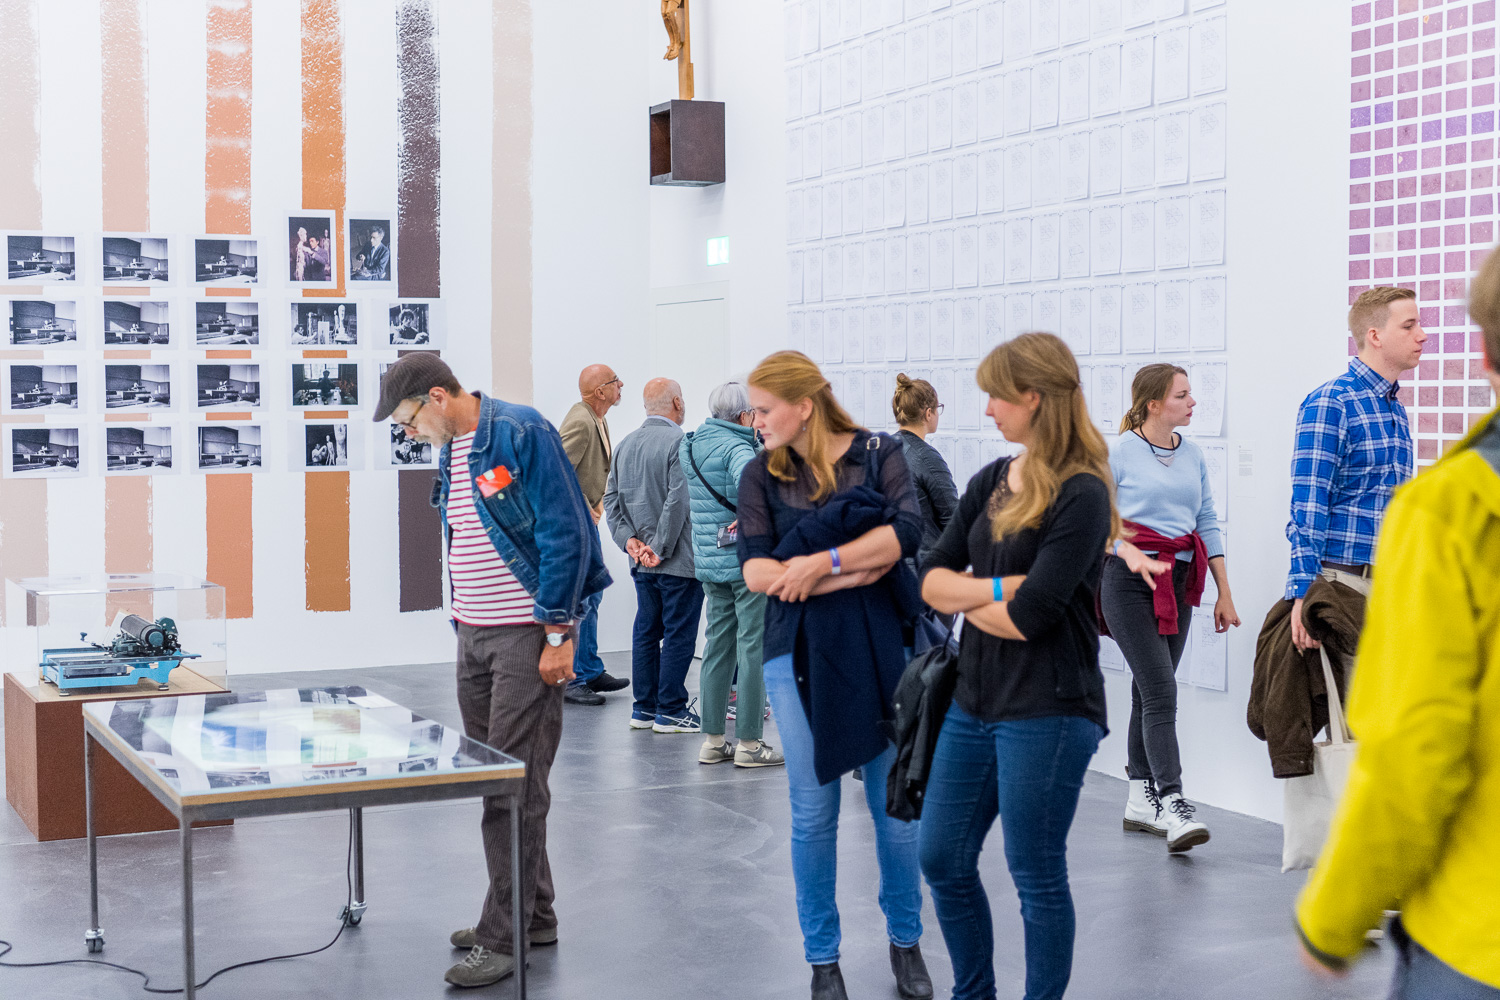 Science meets art: In the Long Night of Museums alone, 2,300 visitors flocked to the Kunsthalle to see the exhibition staged by UZH. (Image: Frank Brüderli)